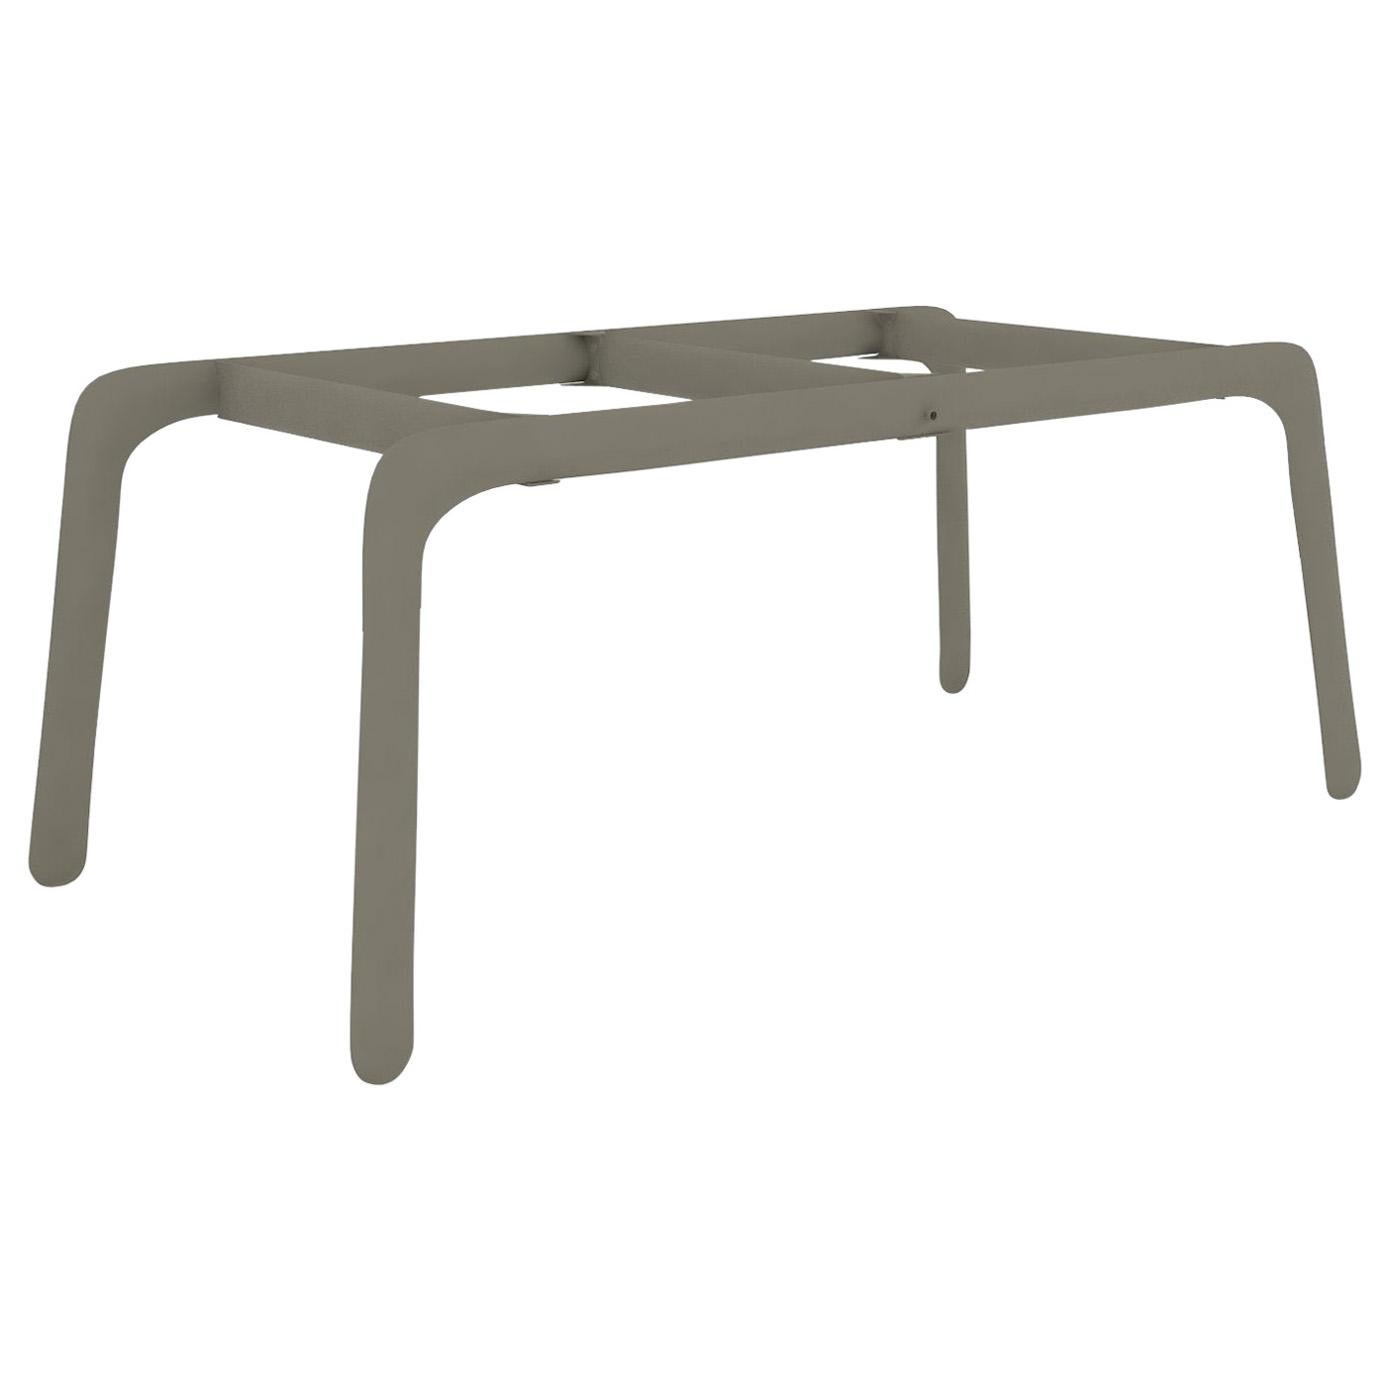 Most Polished Moss Grey Color Carbon Steel Writing Table by Zieta For Sale